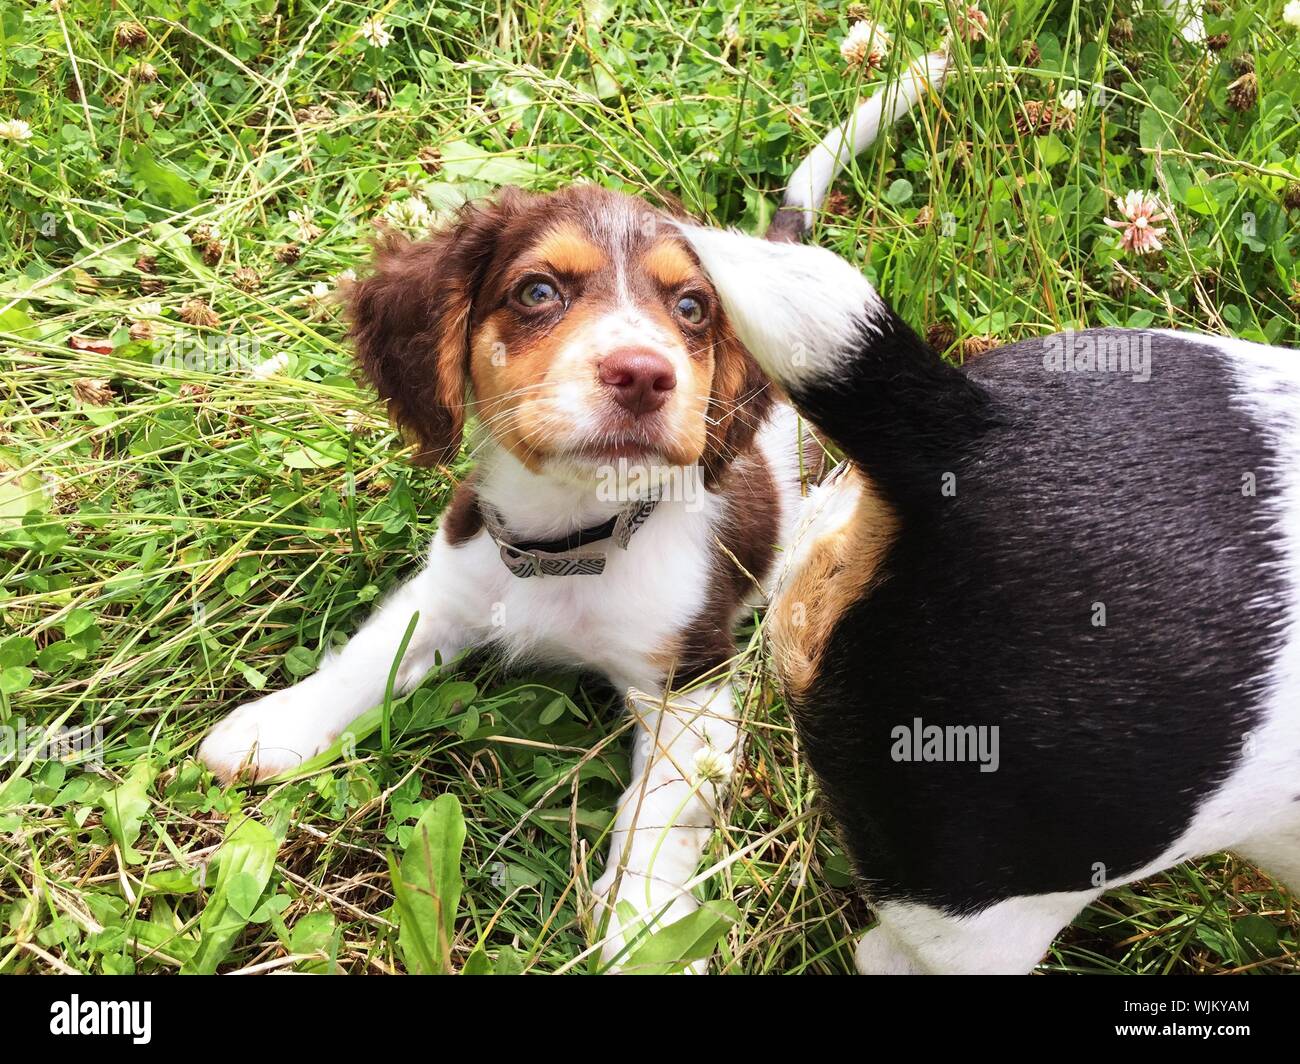 English Springer Spaniel And Jack Russell Terrier On Grassy Field Stock Photo Alamy